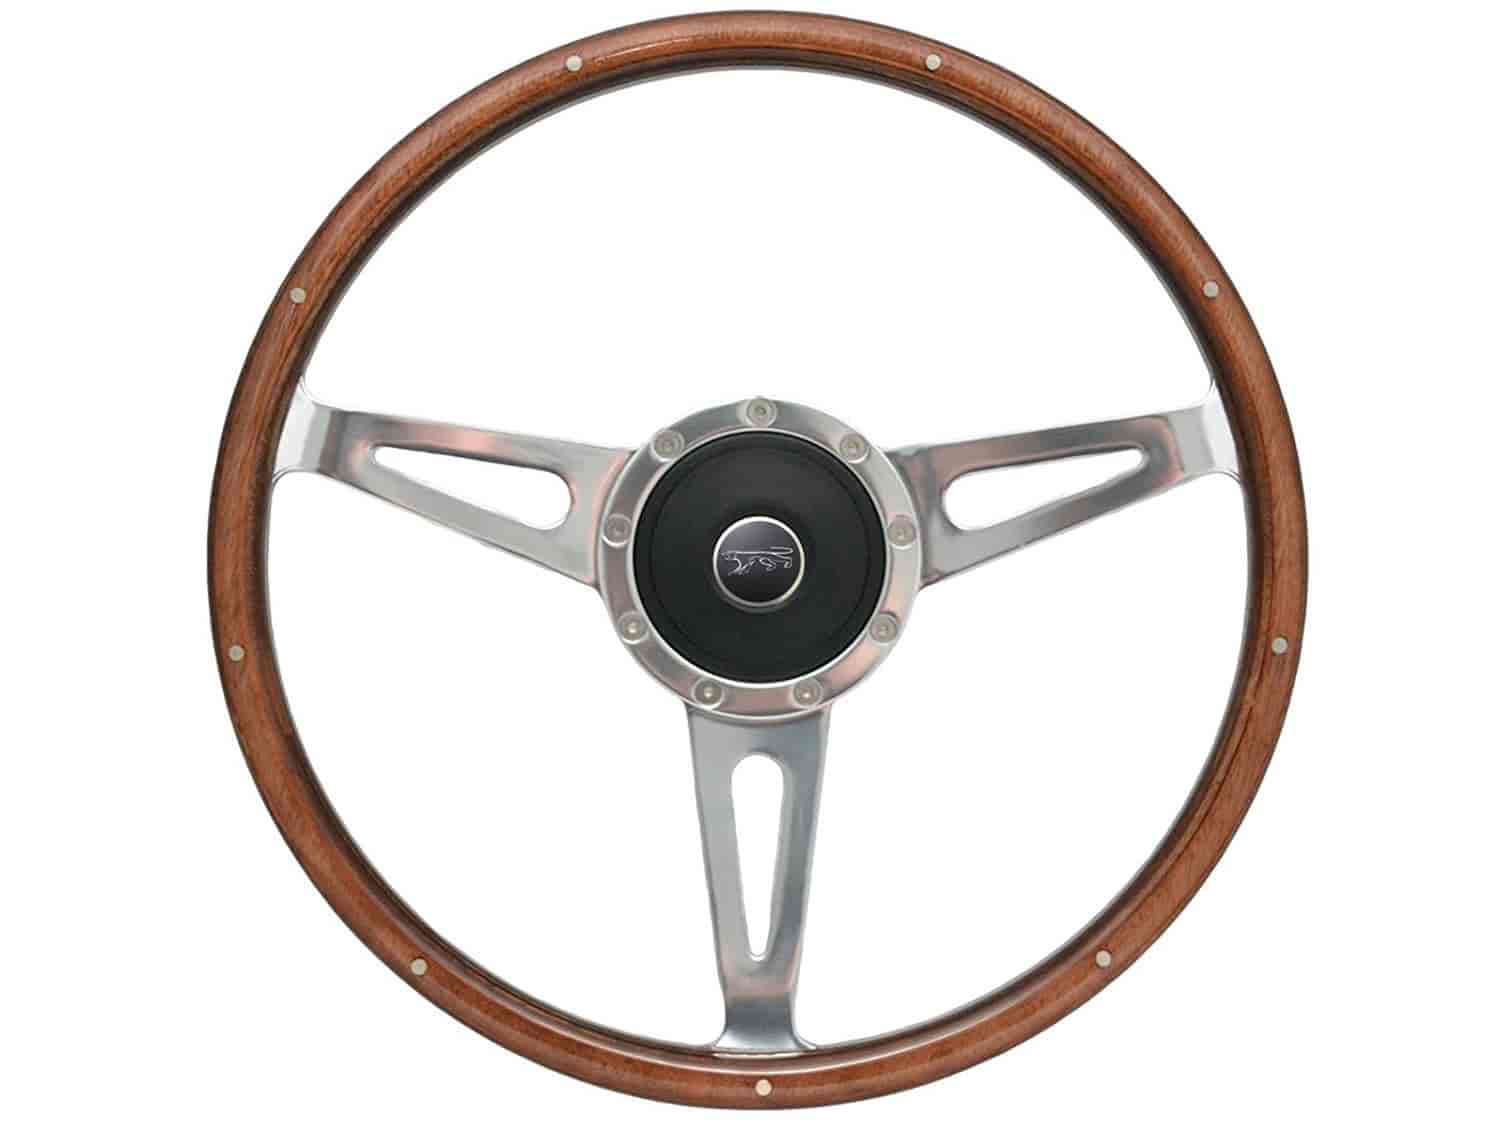 S9 Classic Steering Wheel Kit for 1968-1991 Ford/Mercury, 15 in. Diameter, Walnut Wood Grip, with 9-Bolt Adapter & Horn Button